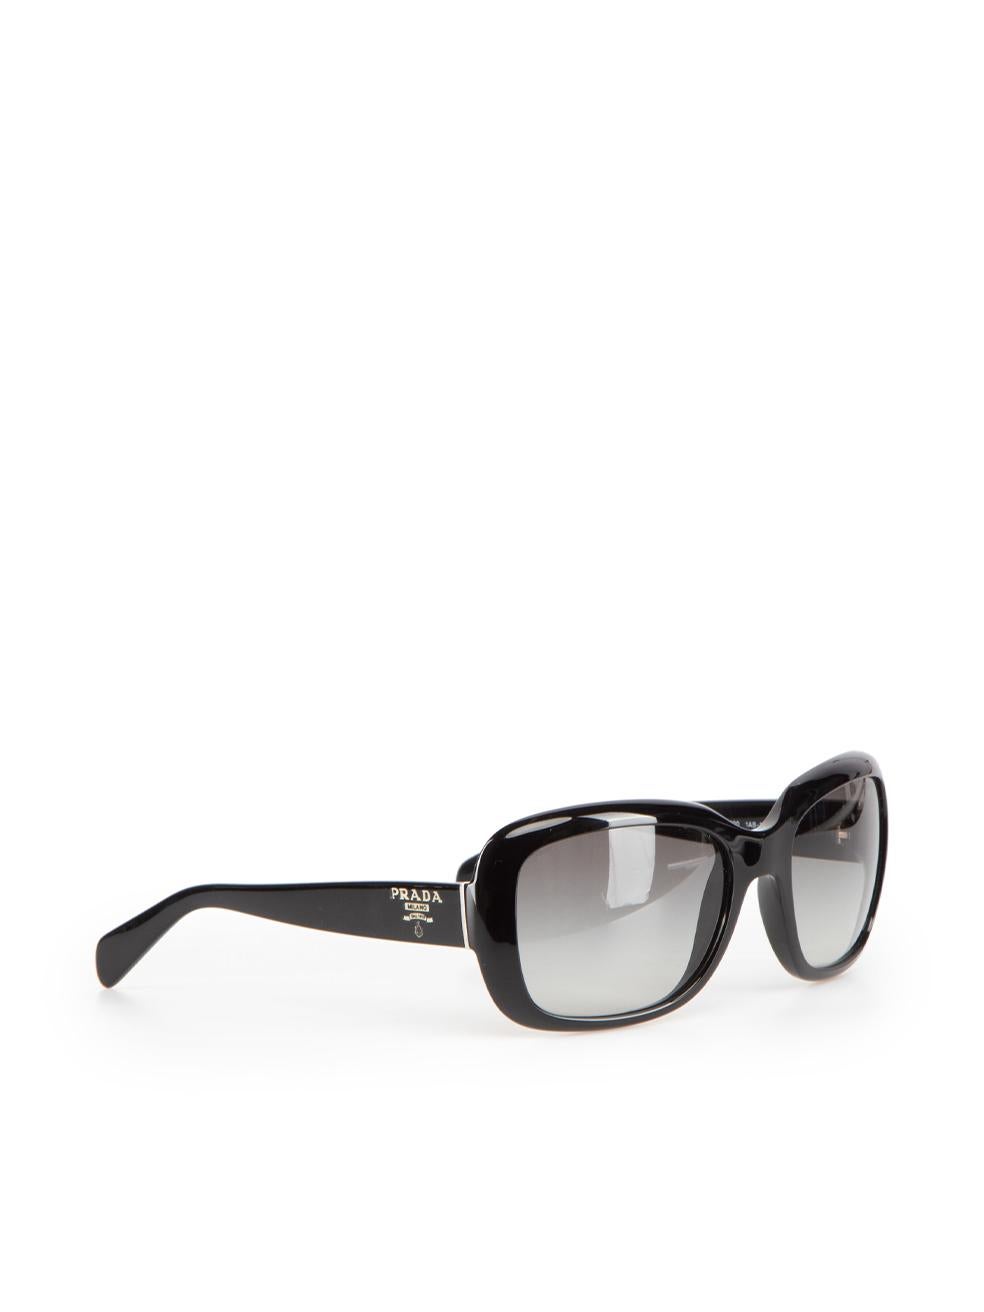 CONDITION is Good. General wear to sunglasses is evident. Moderate signs of wear to the right lens and frame with light scratches on this used Prada designer resale item. These sunglasses come with original case.
 
 Details
 Black
 Plastic
